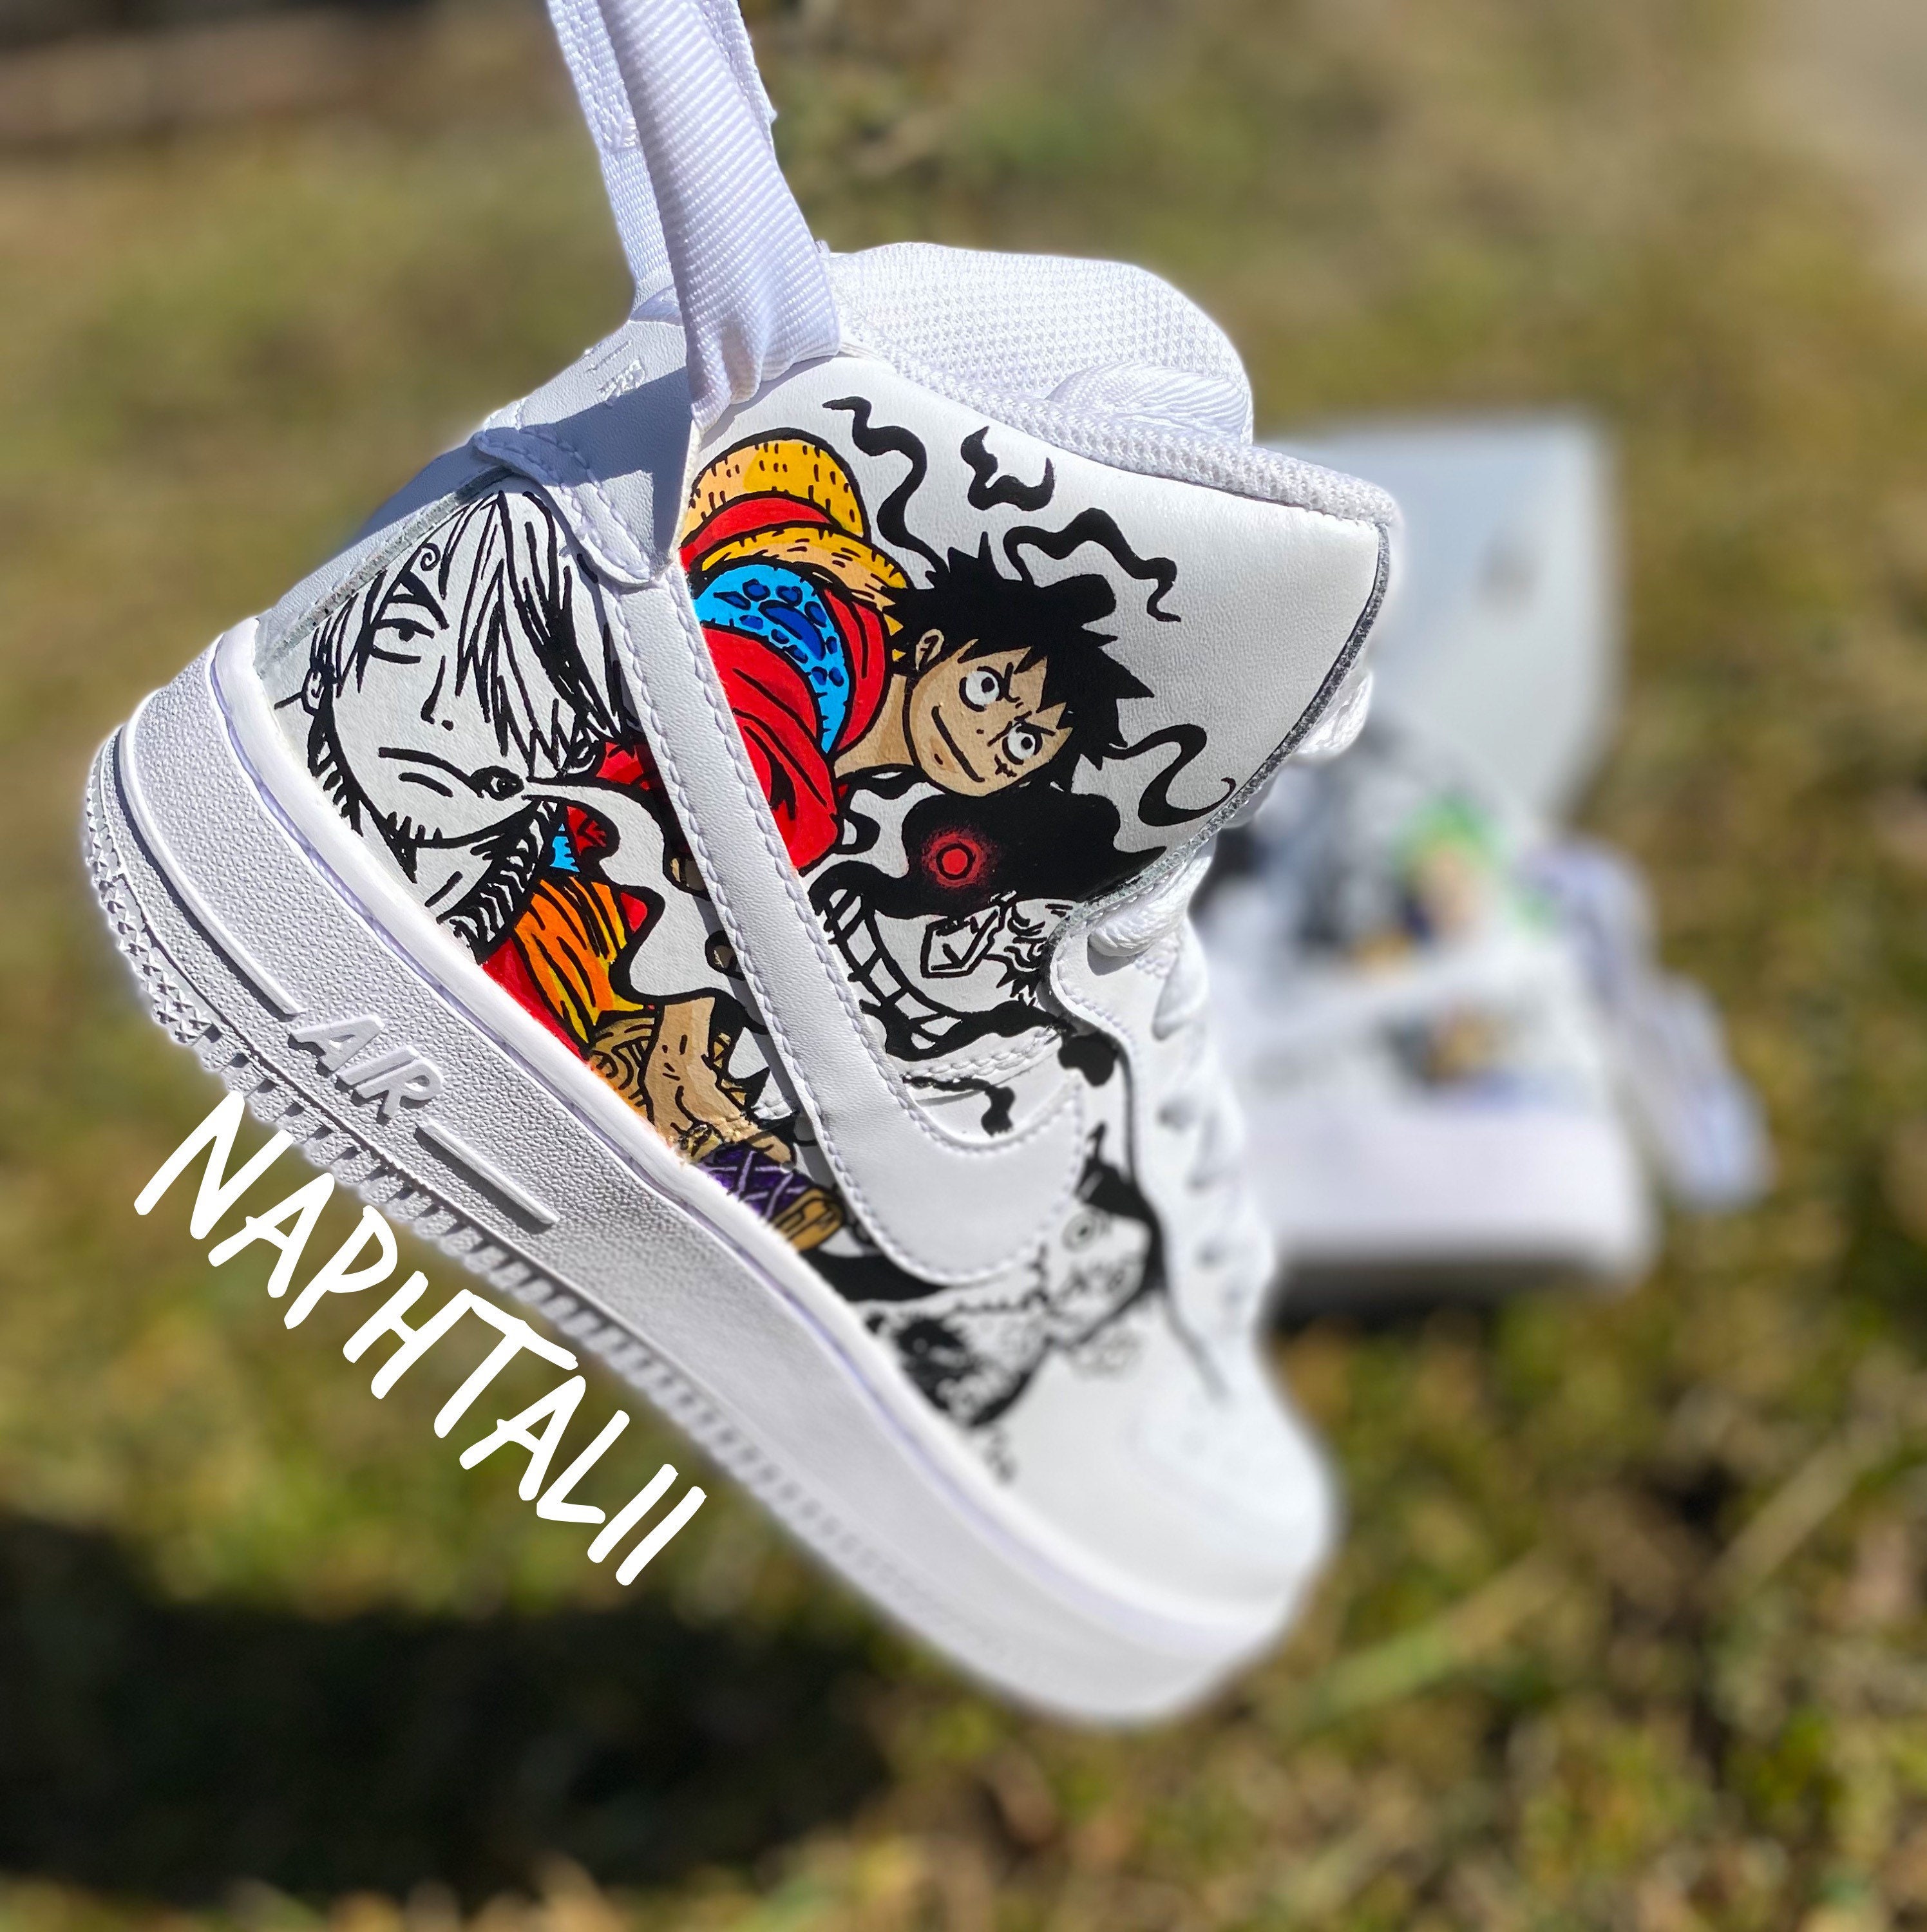 Share 90+ one piece anime shoes best - in.cdgdbentre